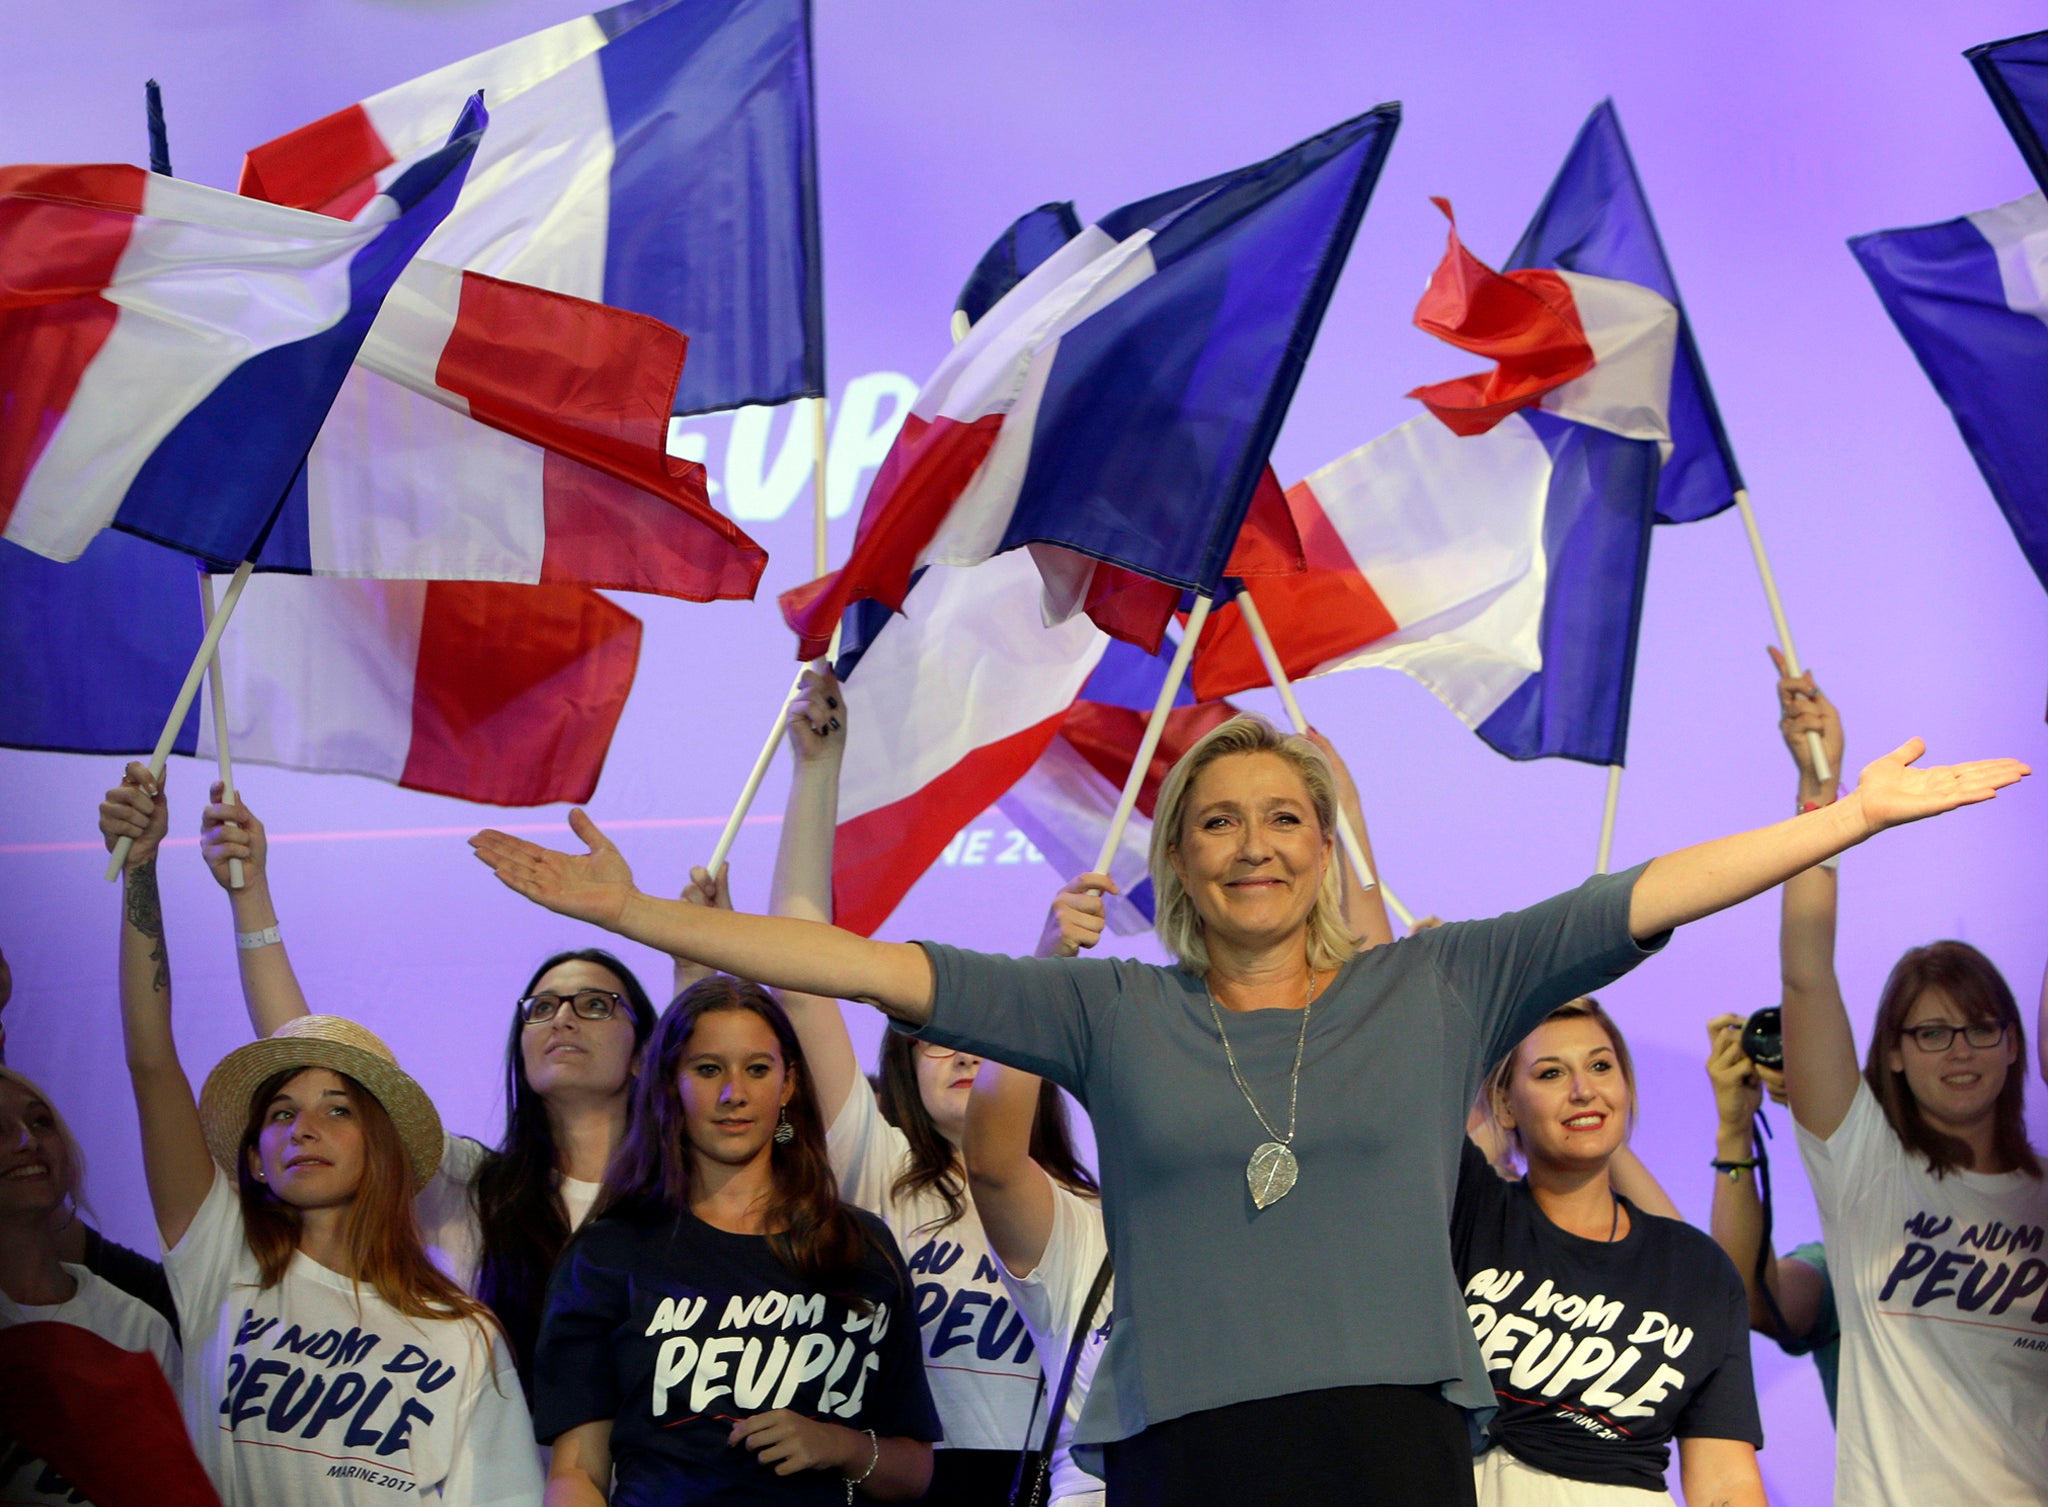 France's far-right Front National leader Marine Le Pen waves to supporters